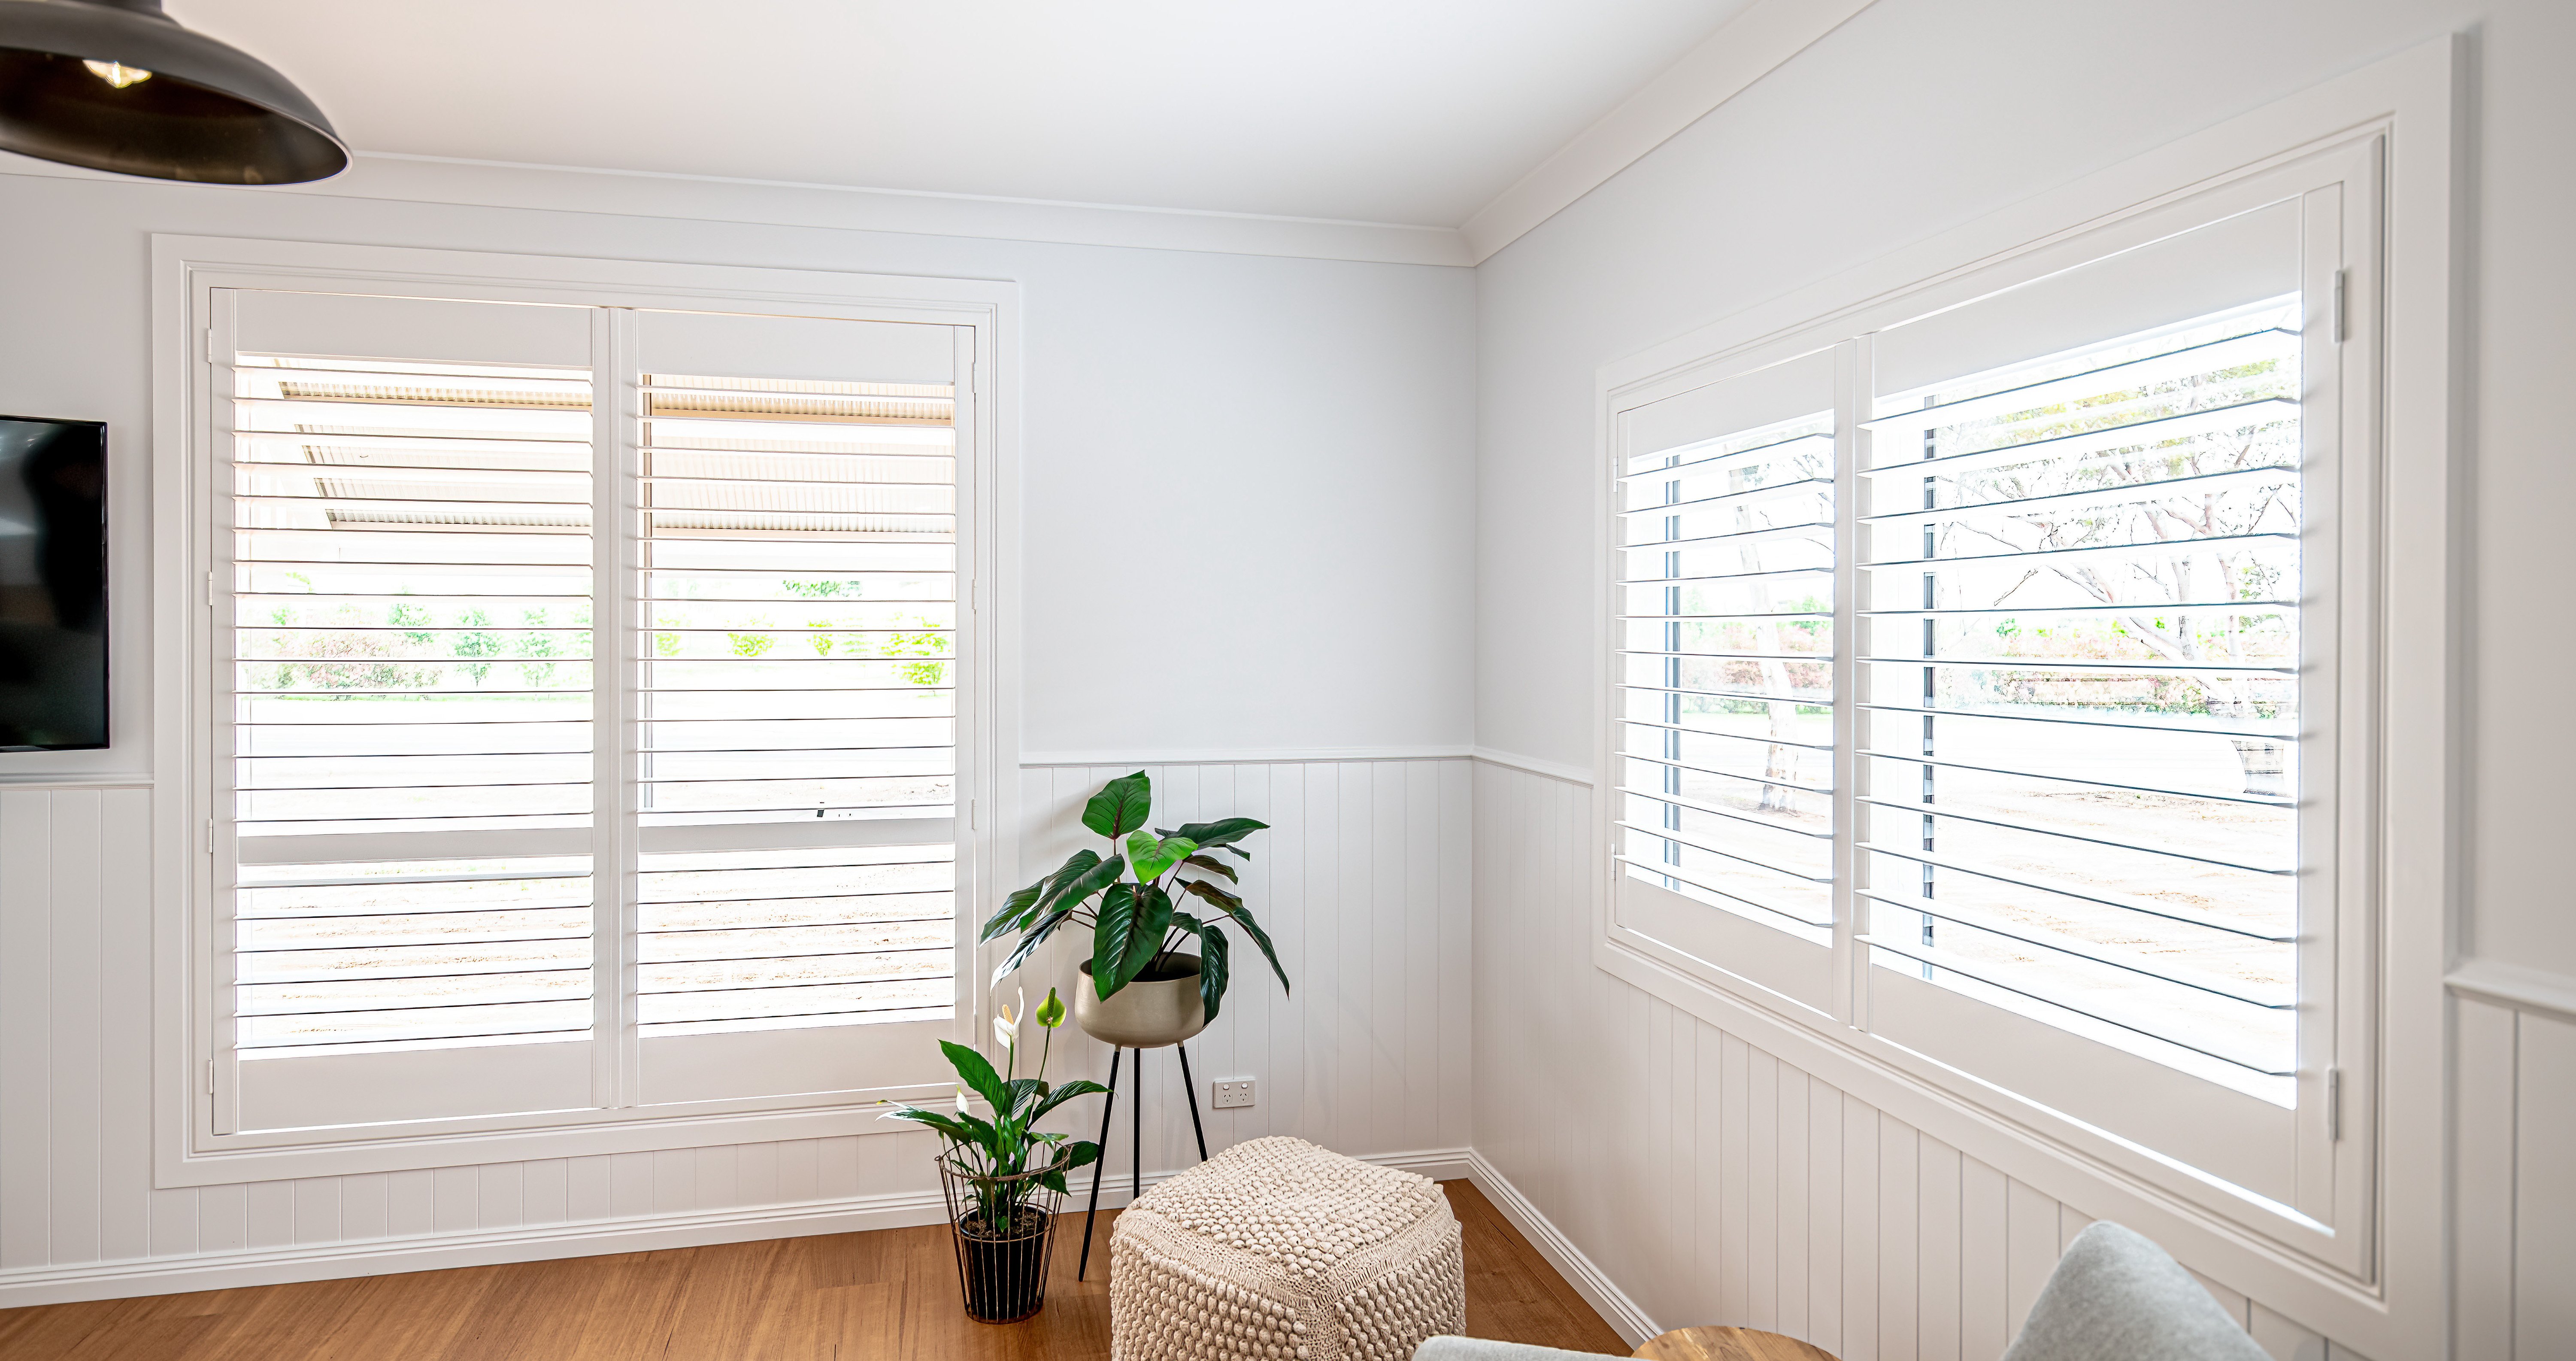 Windows with timber shutters